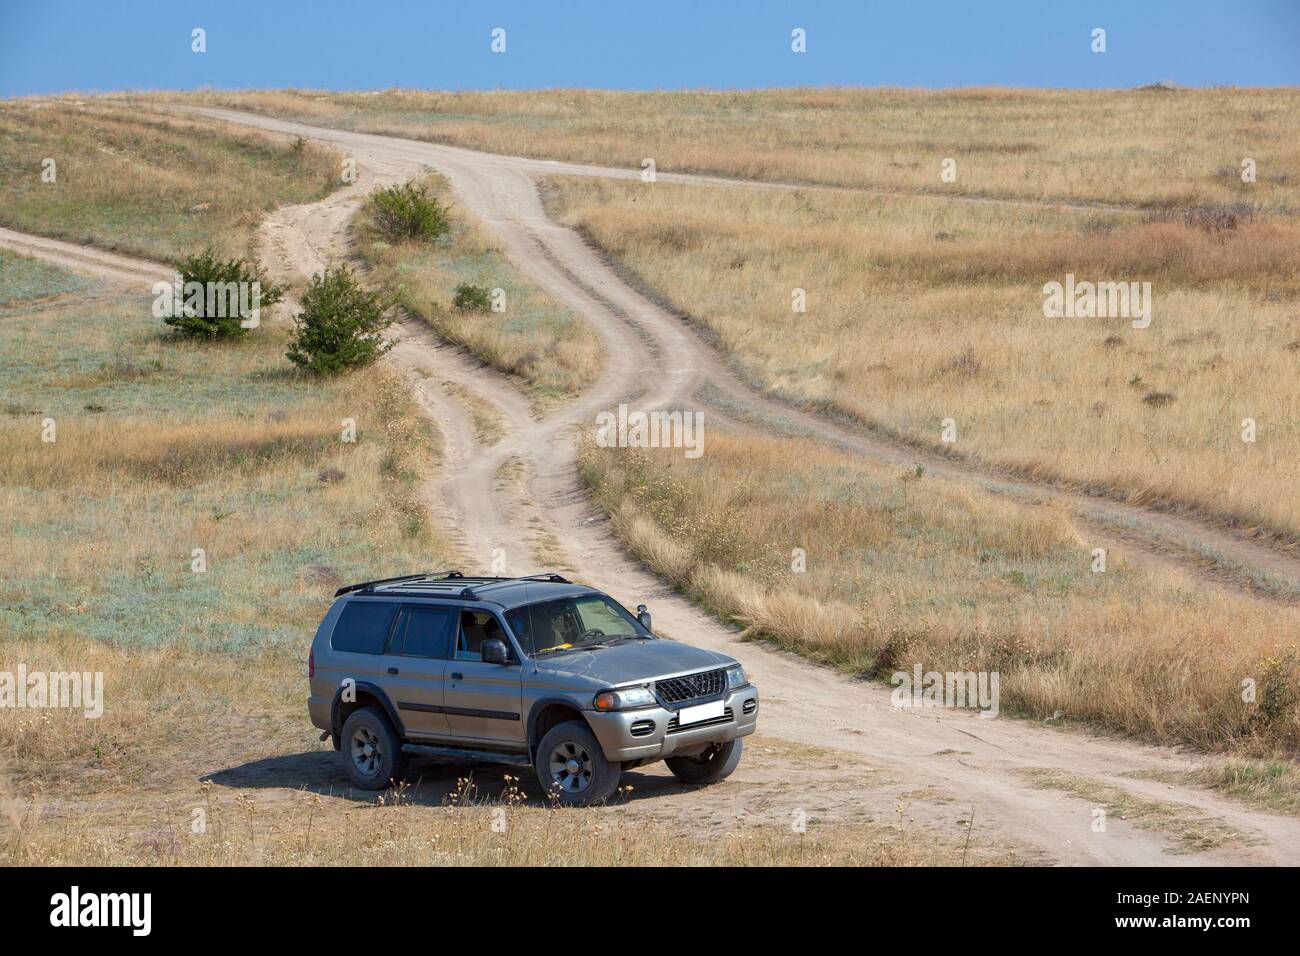 RUSSIA Yeisk-JULY 23, 2019: Off-road car Mitsubishi Montero Sport 2000 release at the countryside. Stock Photo